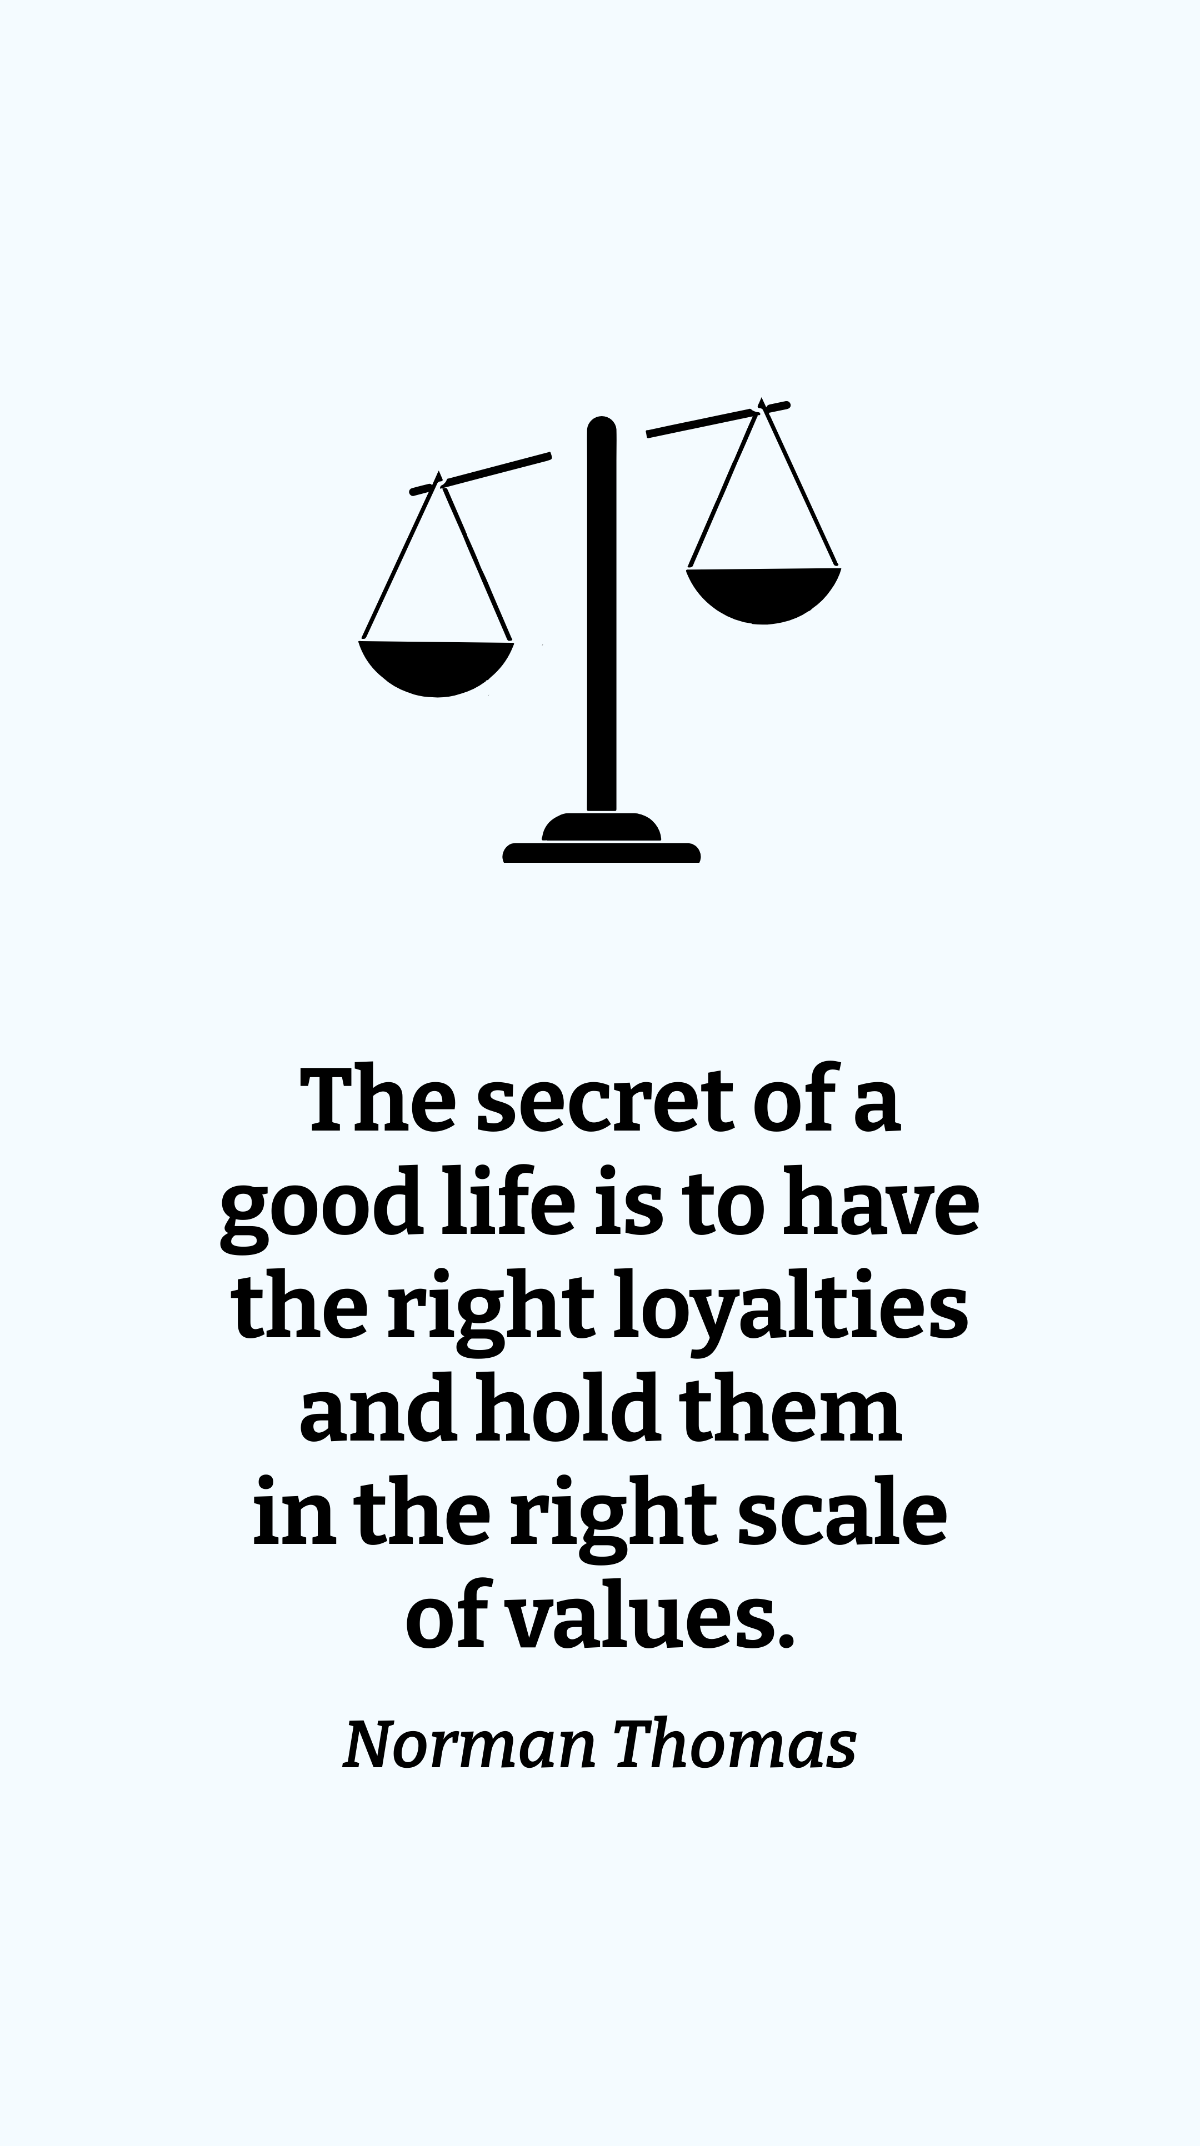 Free Norman Thomas - The secret of a good life is to have the right loyalties and hold them in the right scale of values. Template